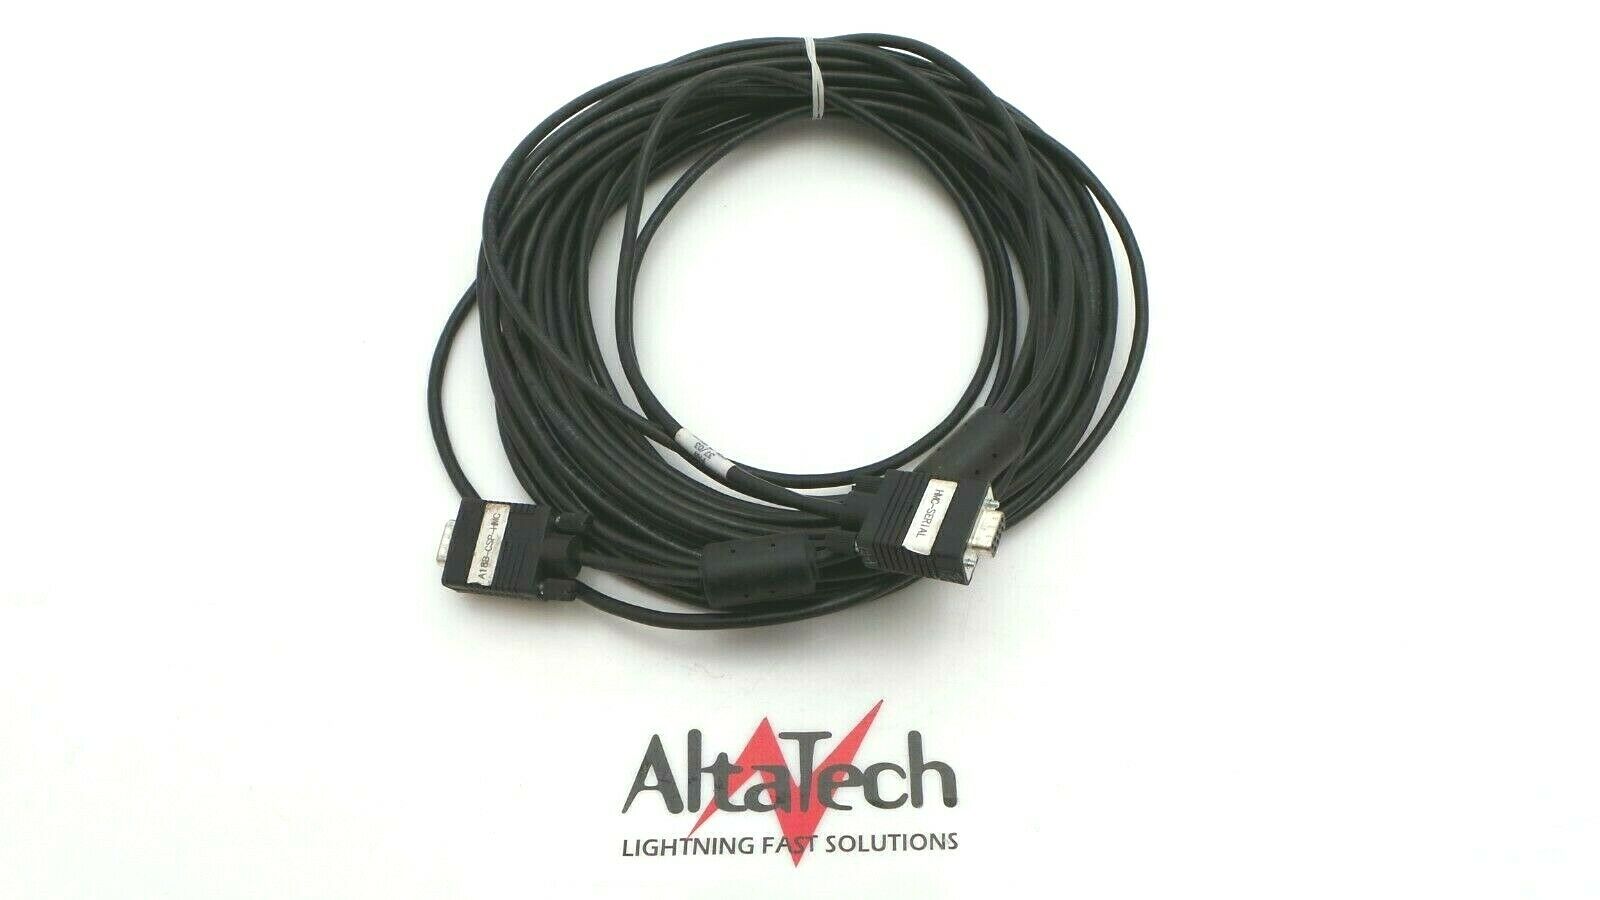 IBM 8121-701X HMC 15m Serial Connecting Cable, Used